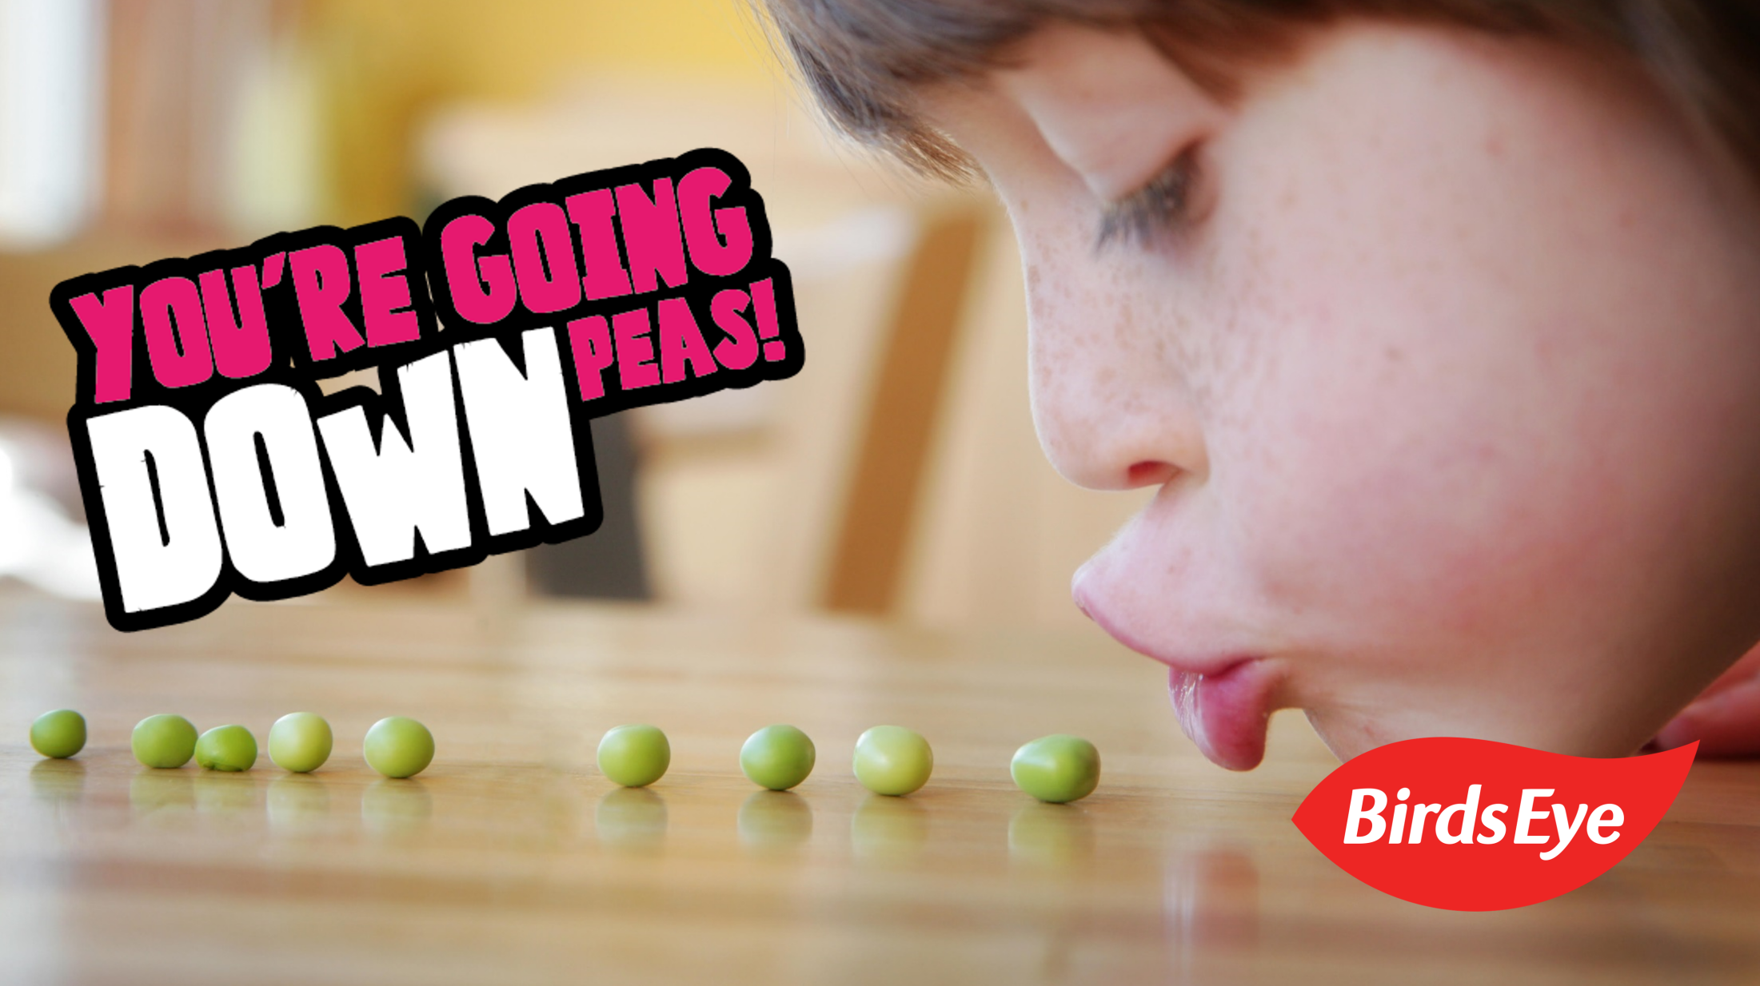 Your're going down peas